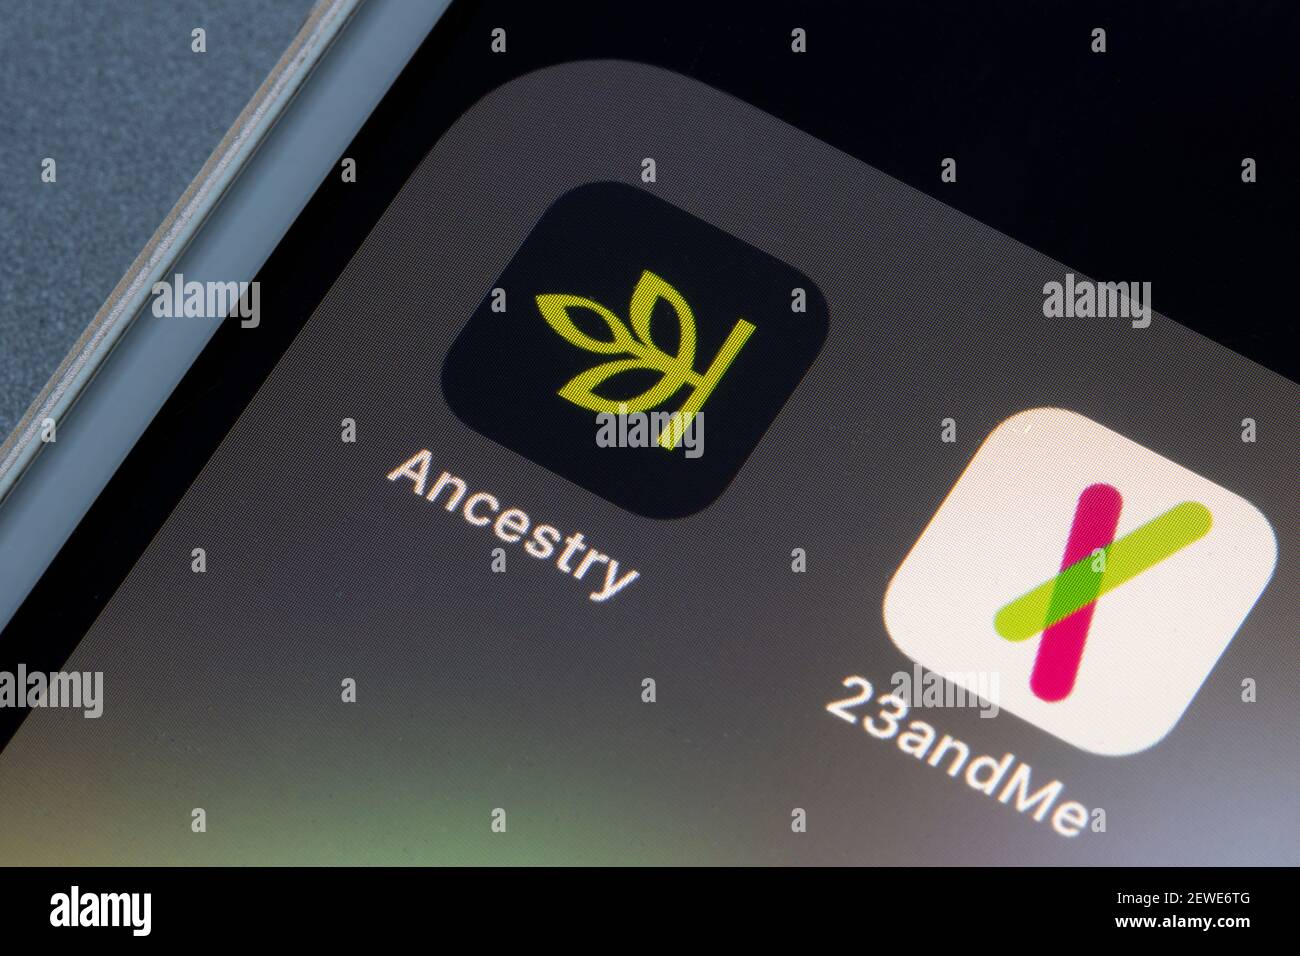 Ancestry and 23andMe mobile apps are seen on an iPhone on March 1, 2021. Both companies provide personal genetic DNA tests including health... Stock Photo